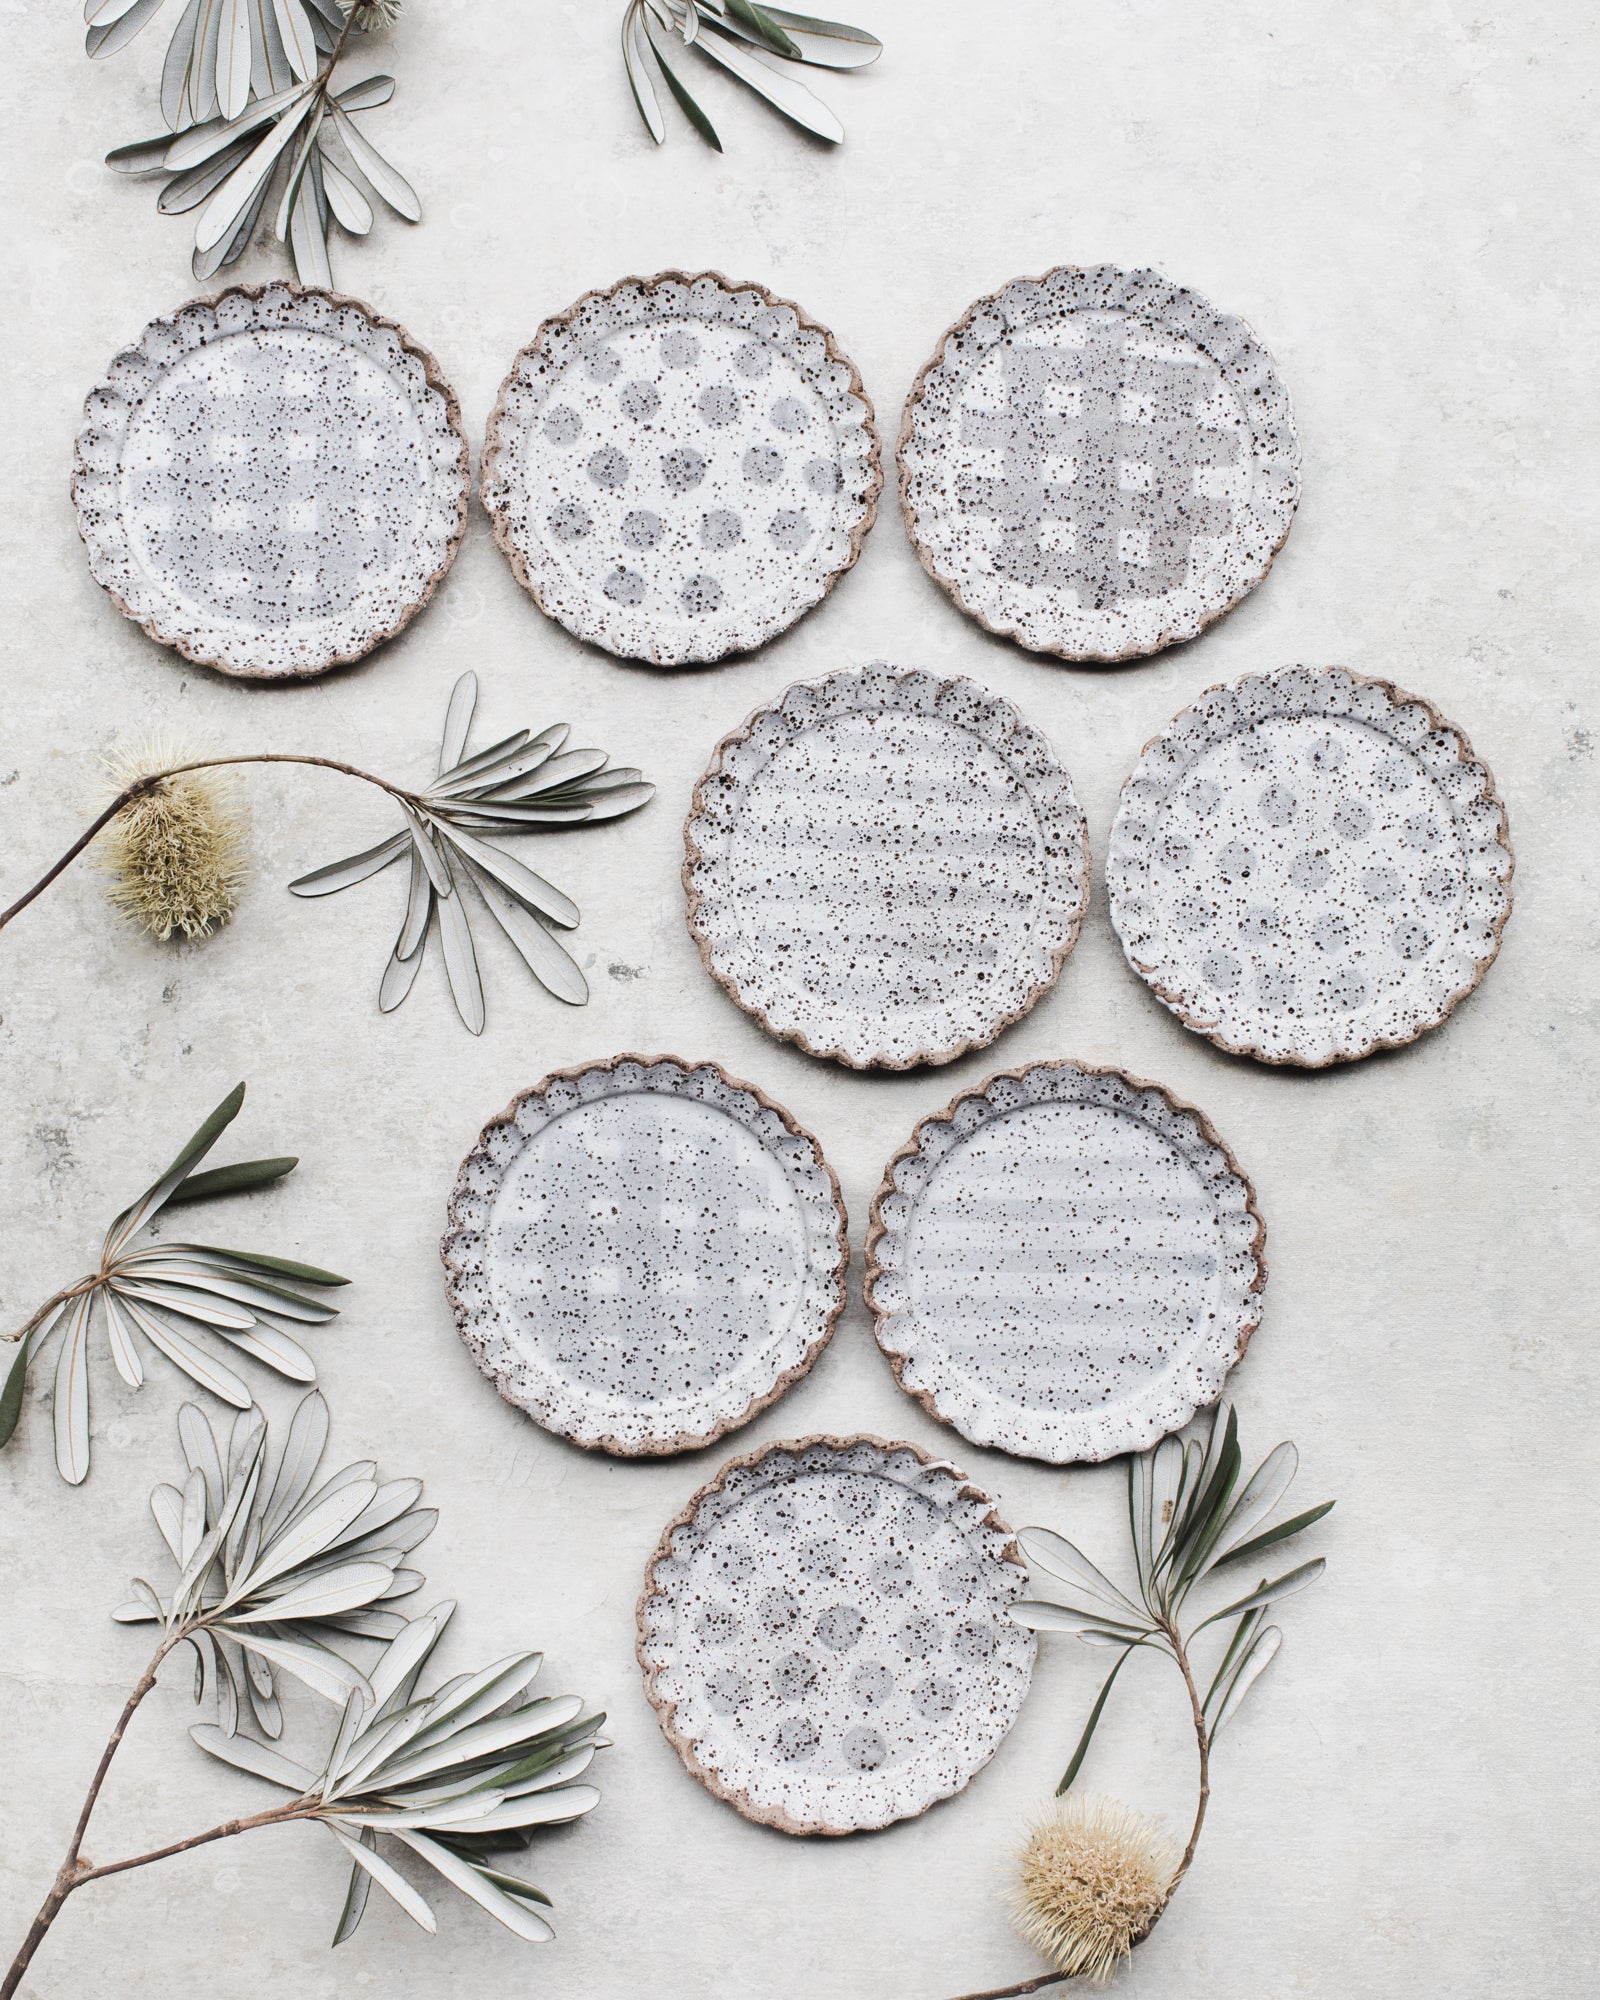 Speckled cake plates with scalloped rims handmade by clay beehive ceramics